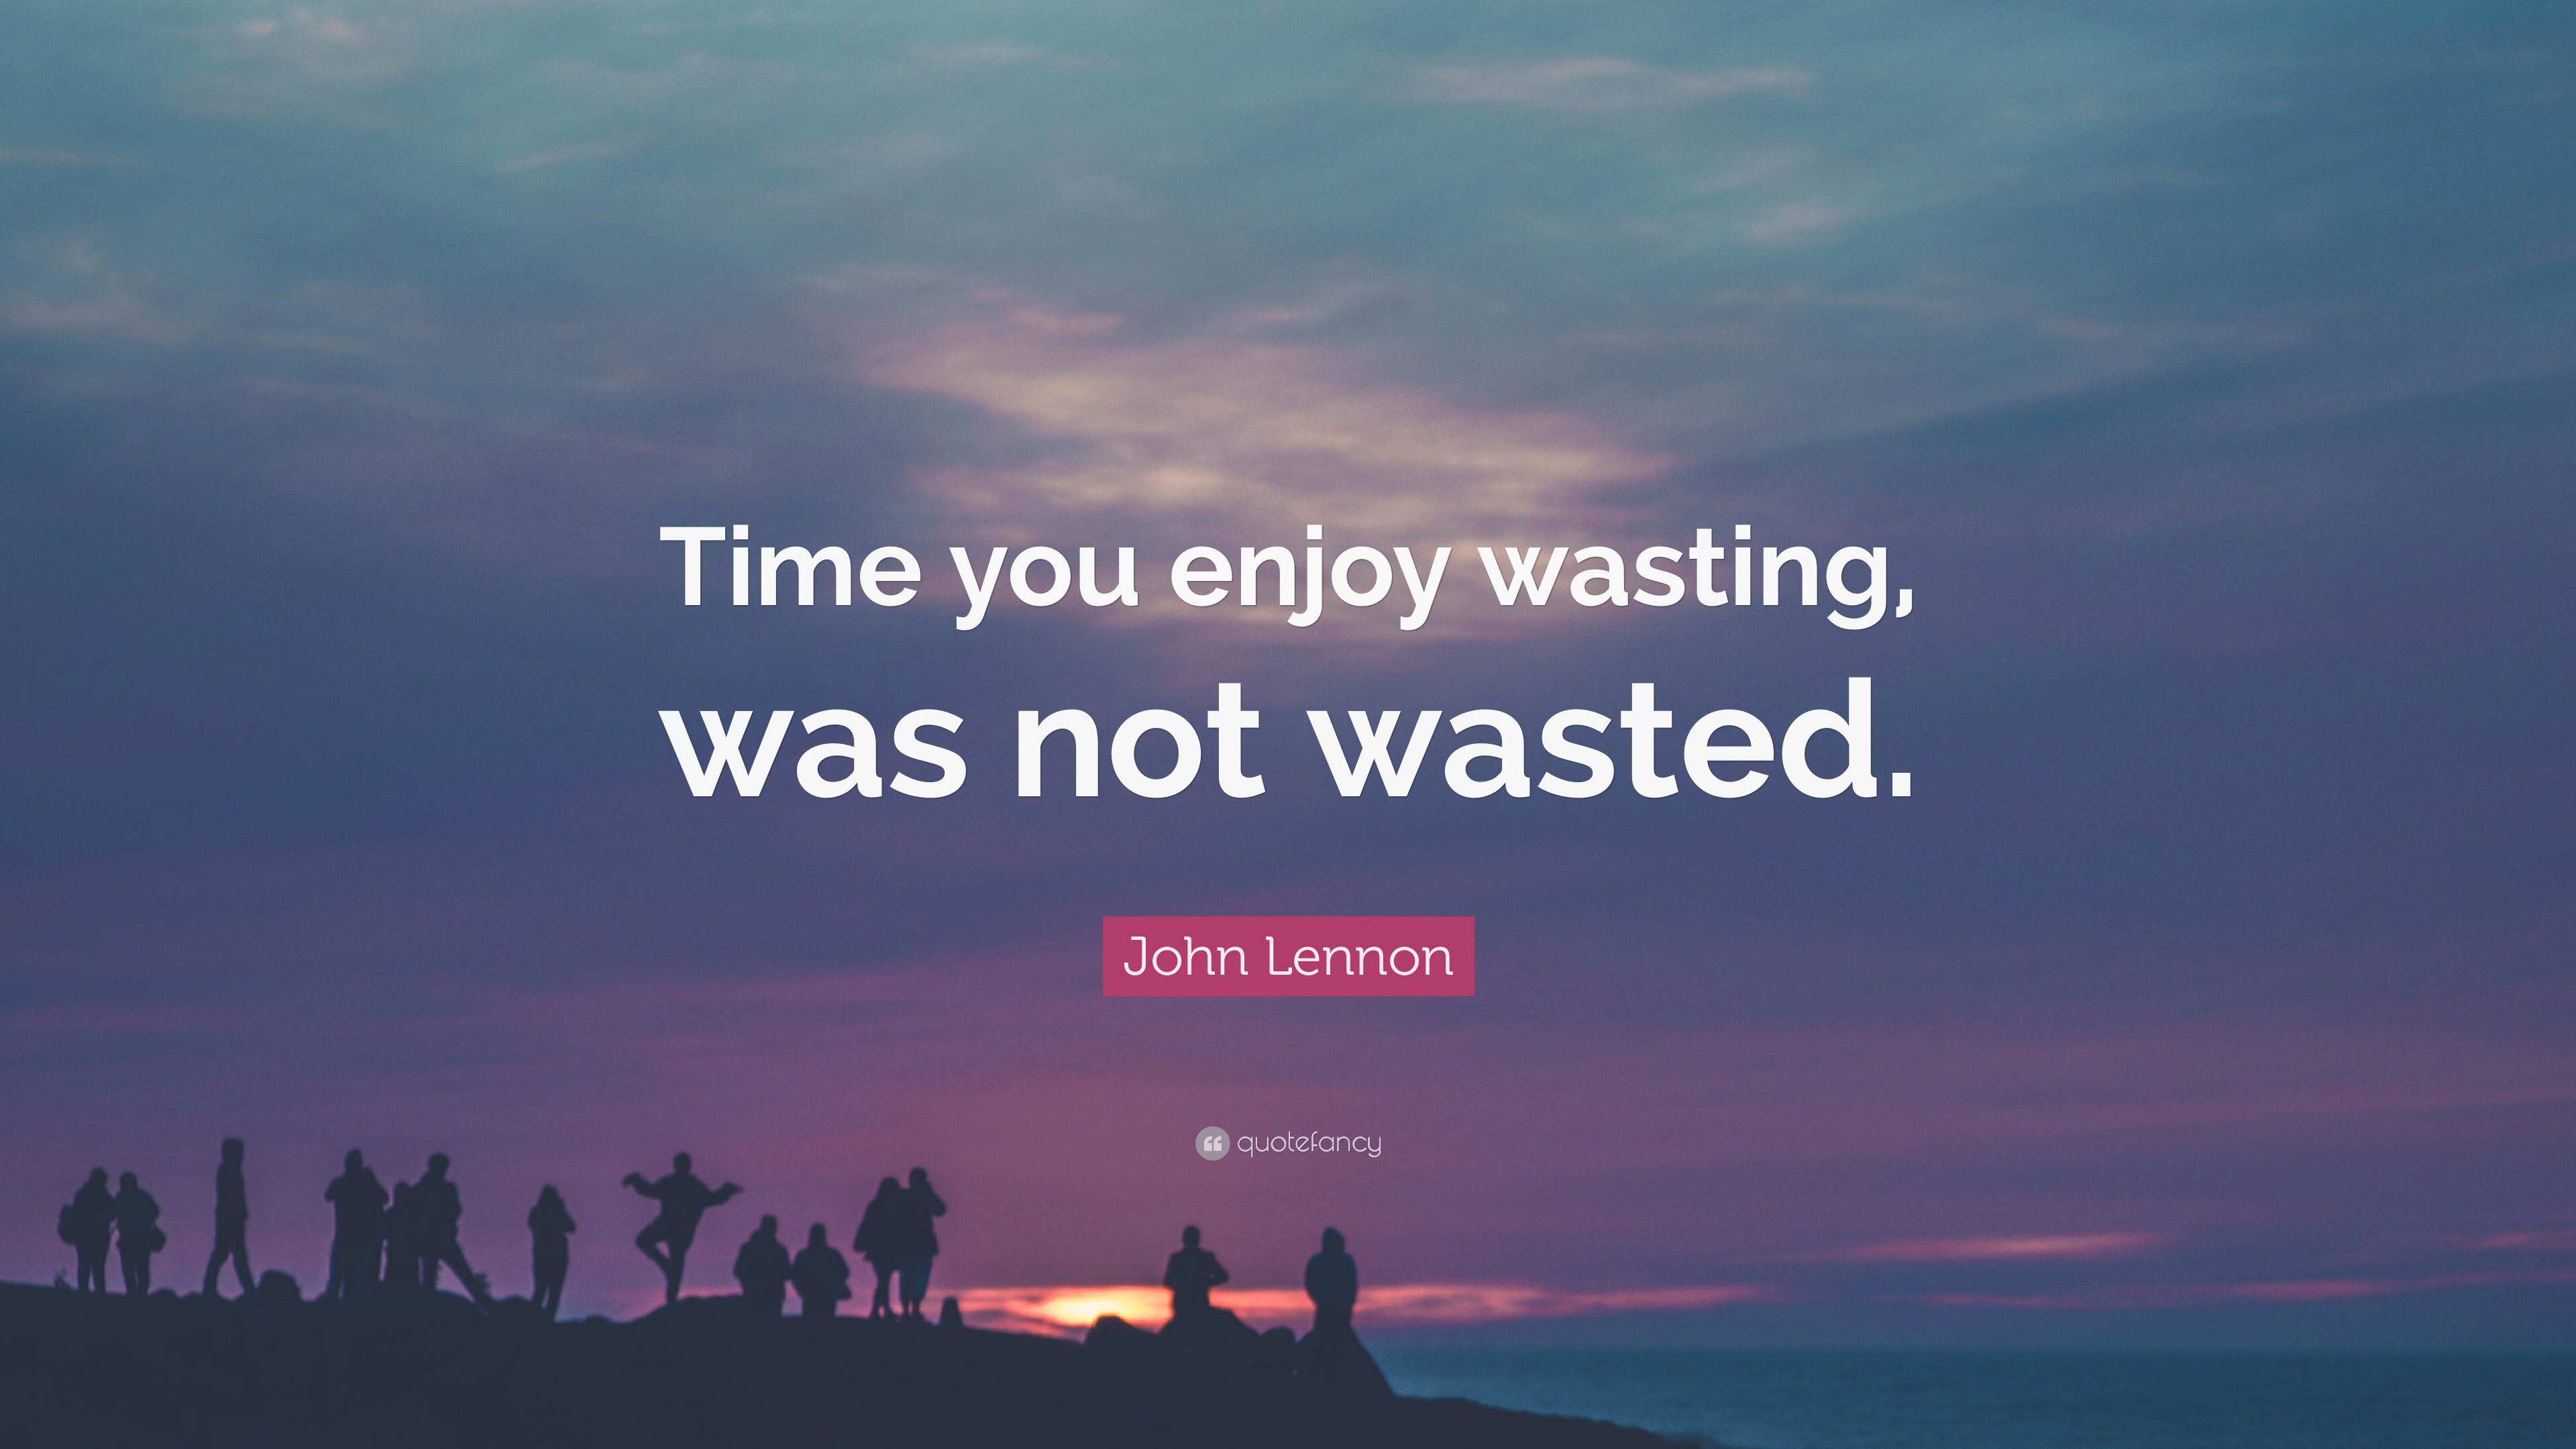 John Lennon Quotes 441 Wallpapers Quotefancy